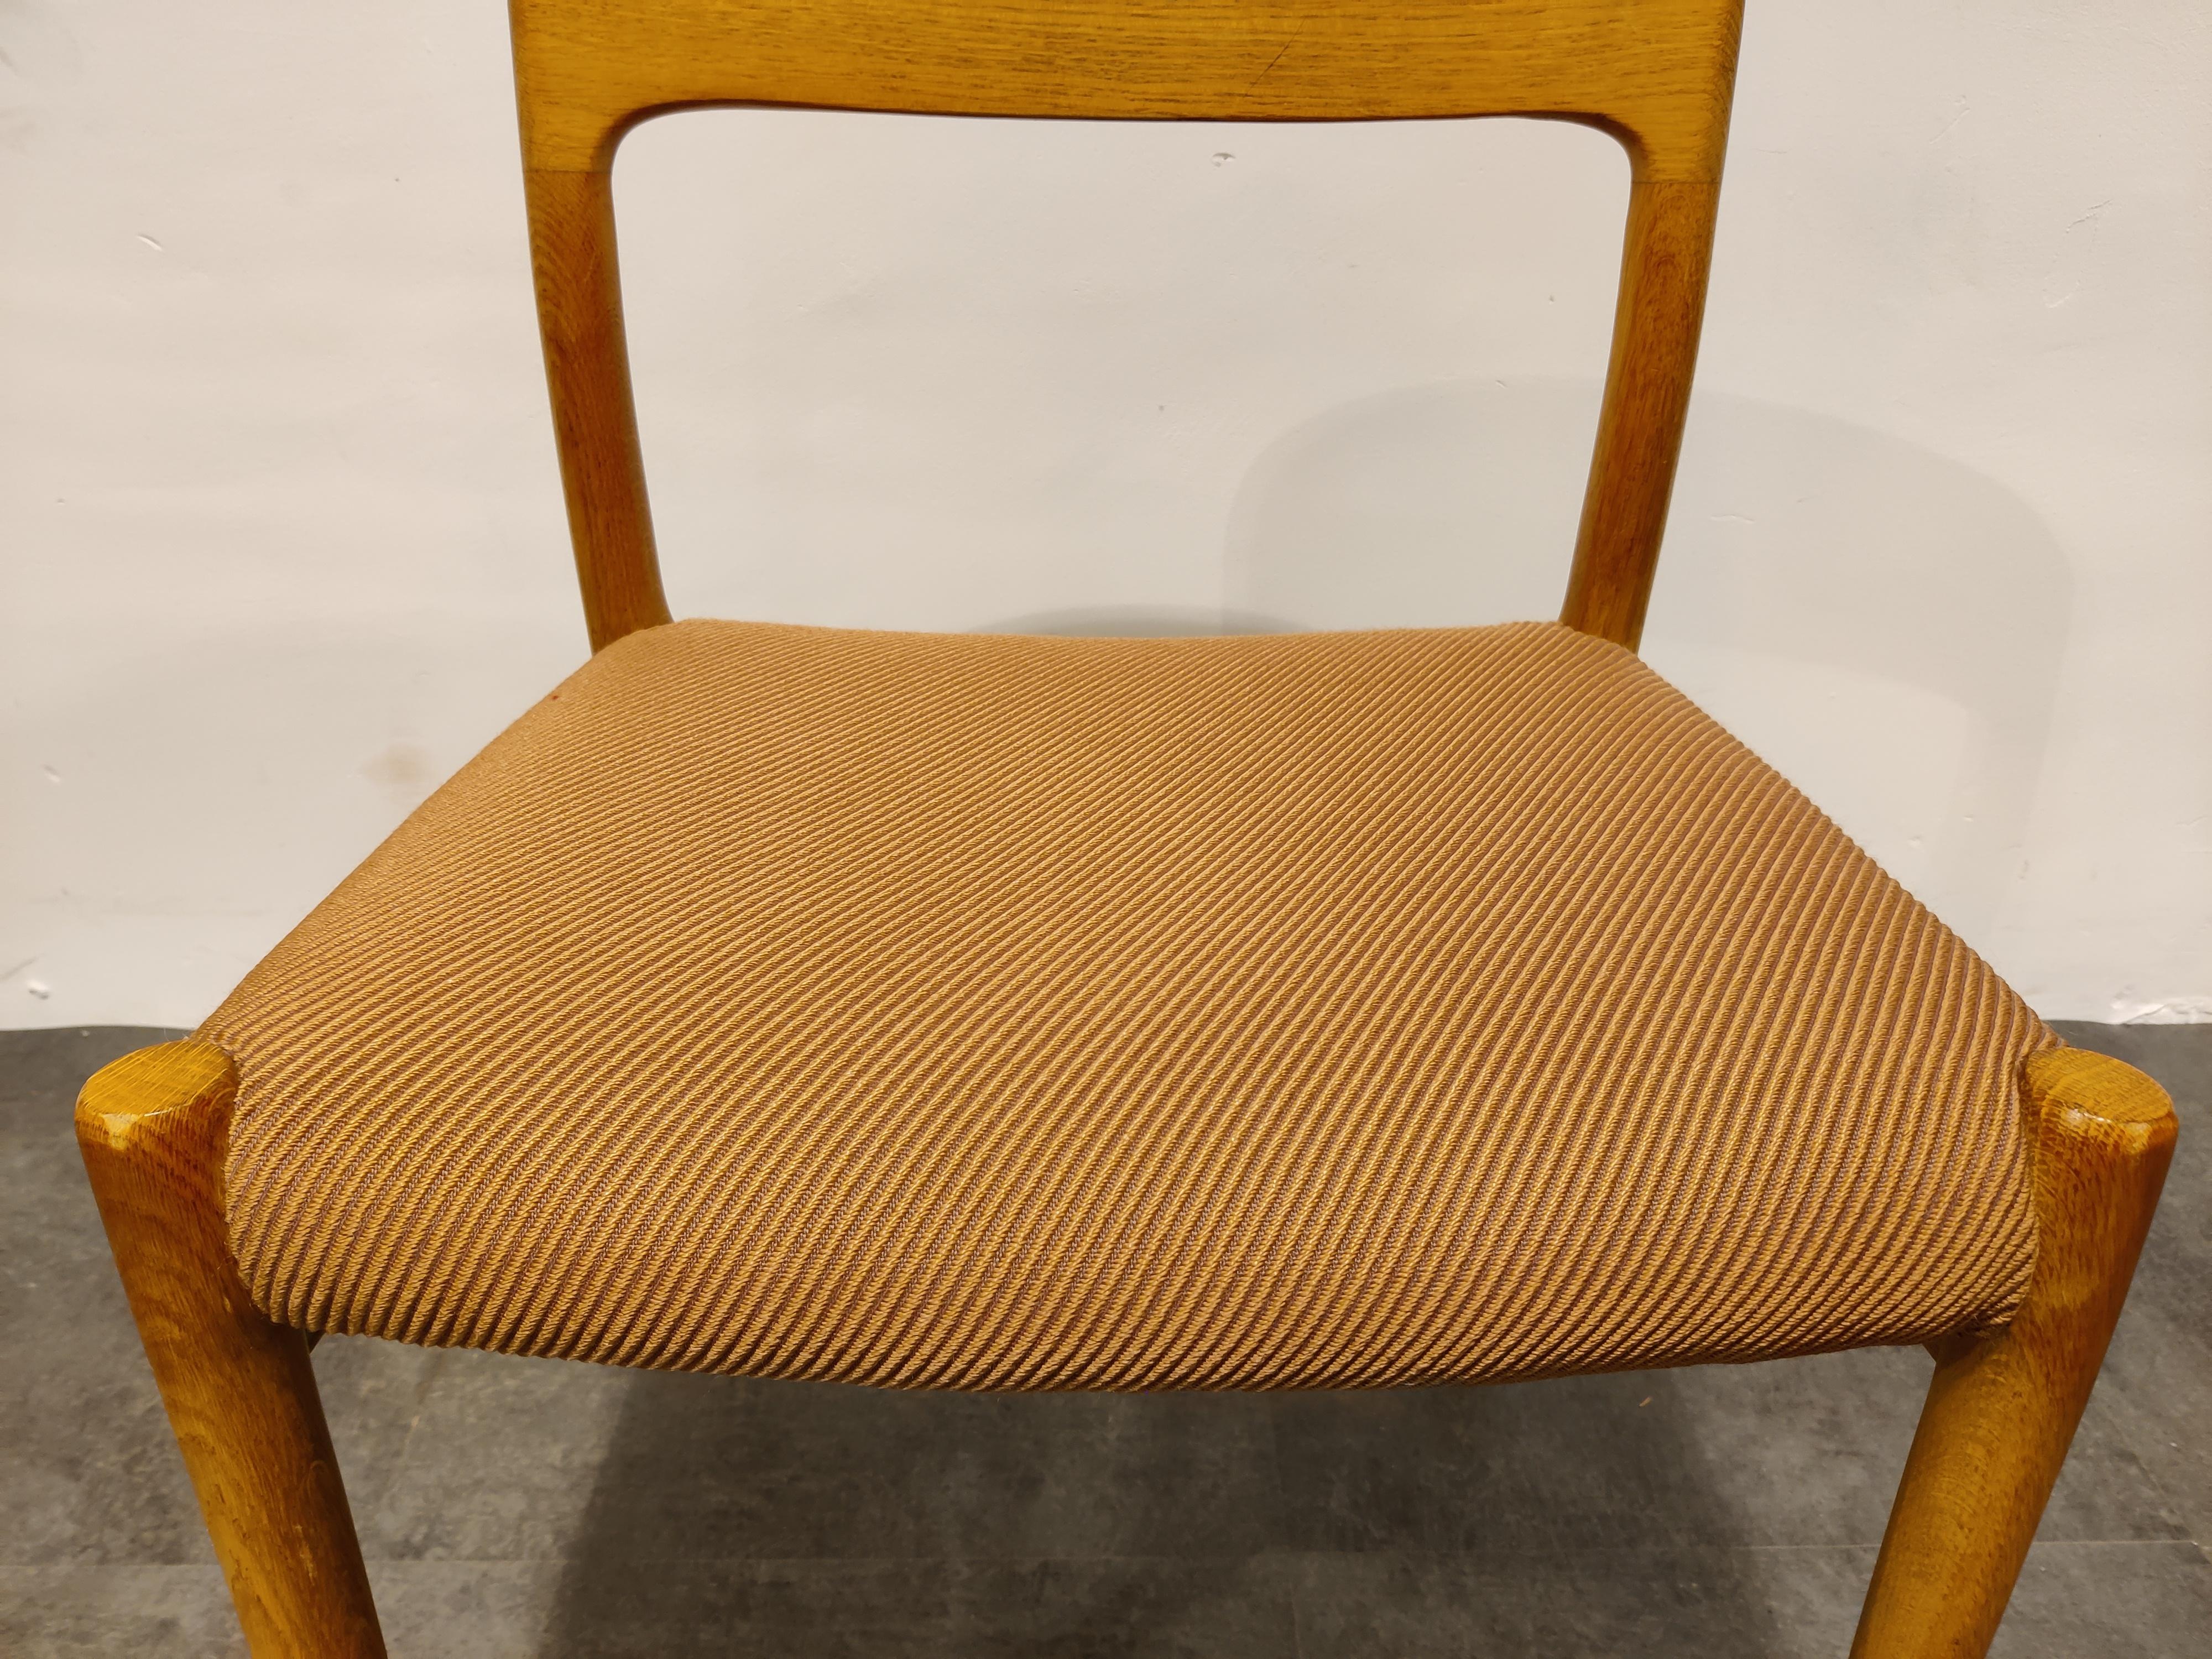 Elegantly shaped set of 6 dining chairs designed by Niels Otto Moller for JL. Mollers.

Beautiful organic shaped wooden frames with original reeded salmon pink fabric upholstery.

Good original condition.

1960s Denmark

Height: